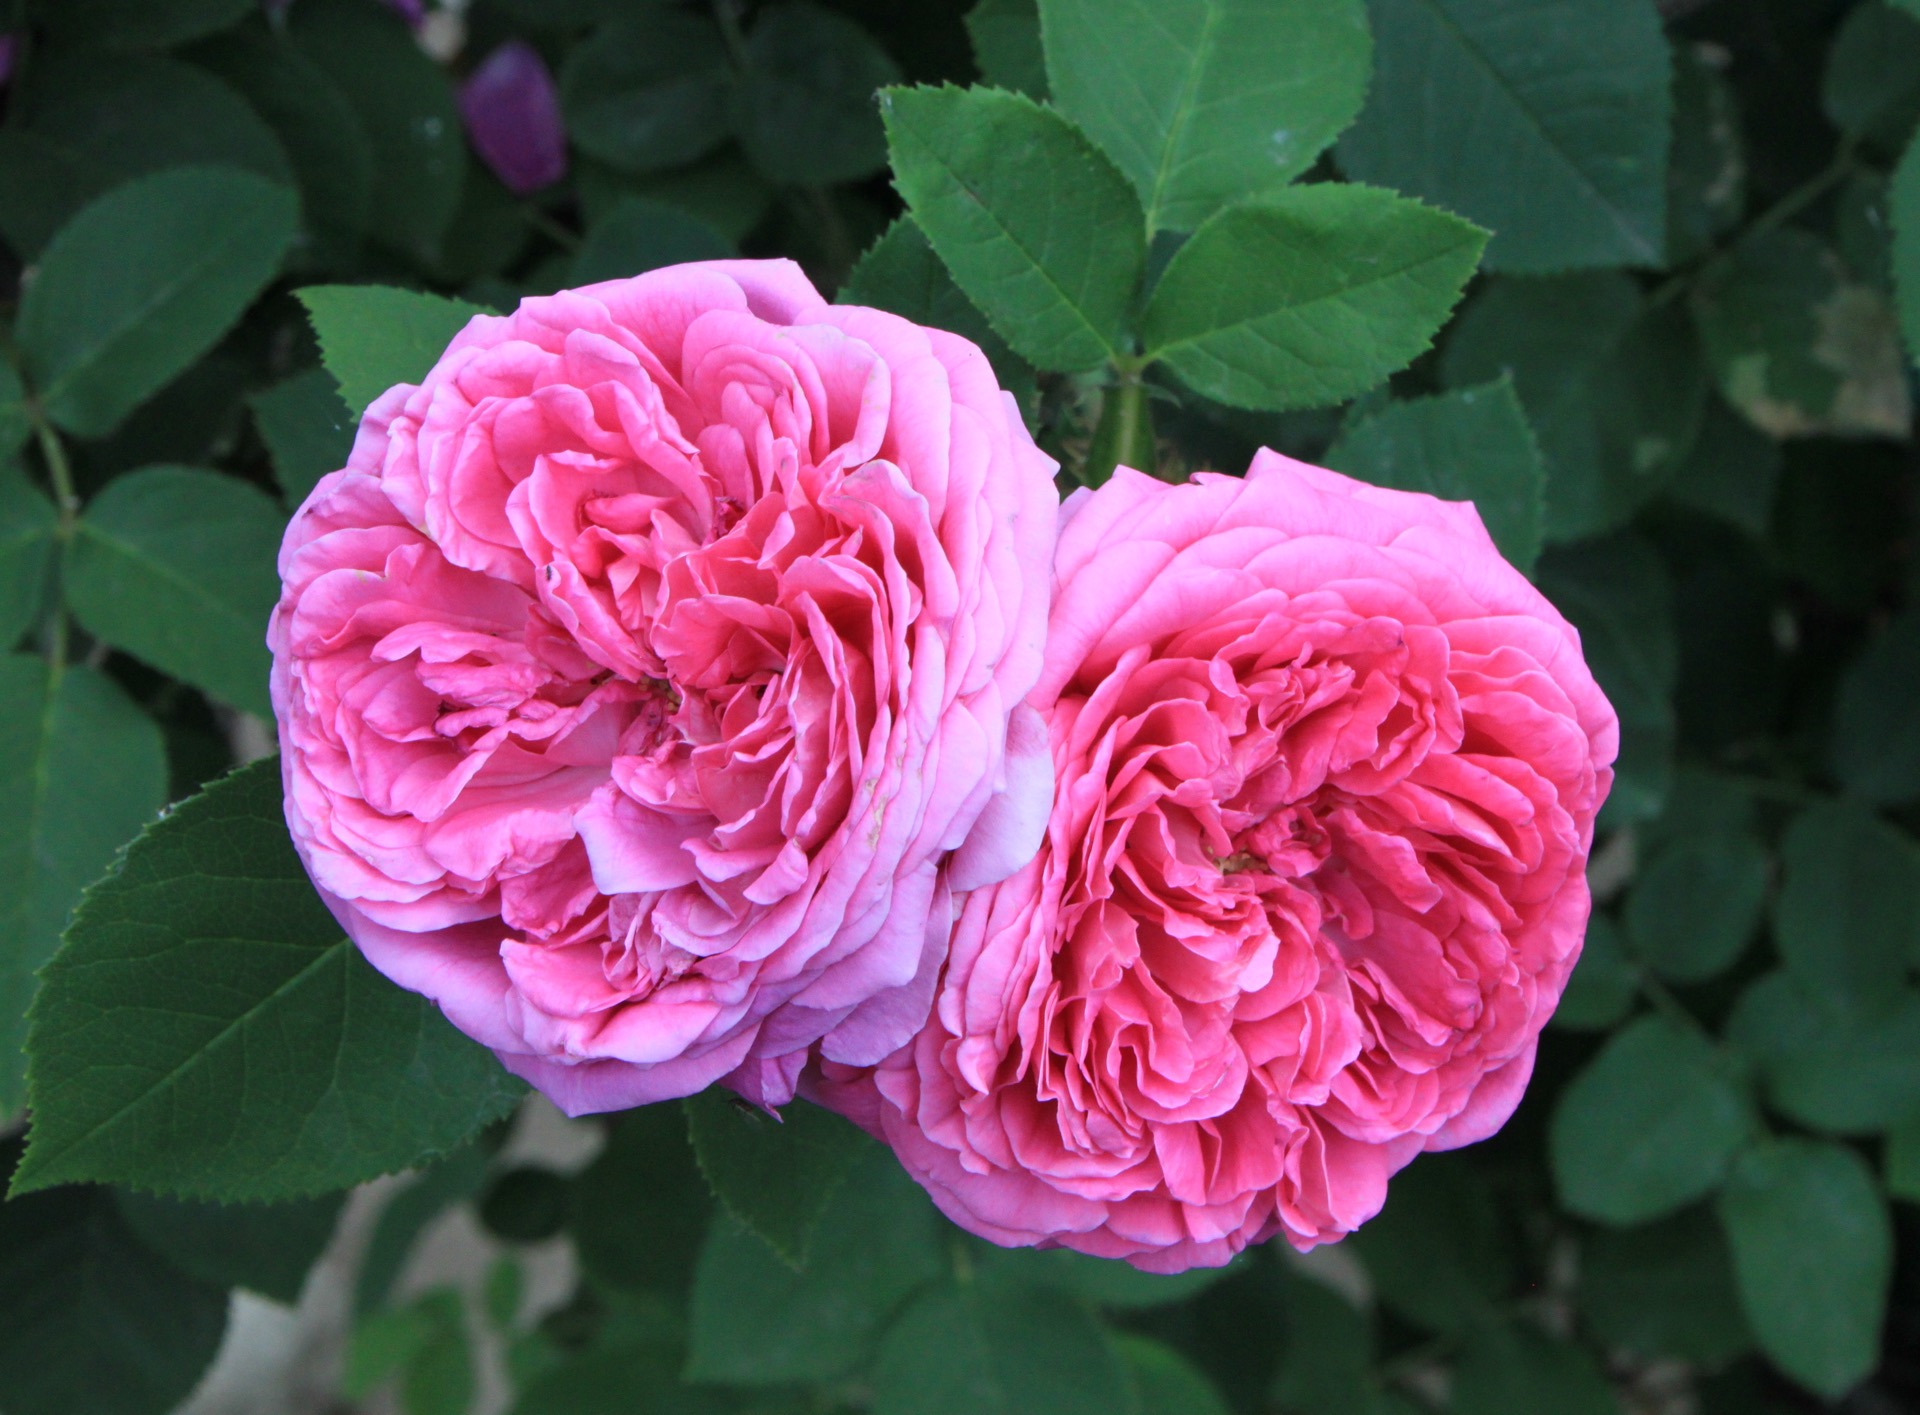 Closeup phot of two bright pink damask roses on a background of green leaves